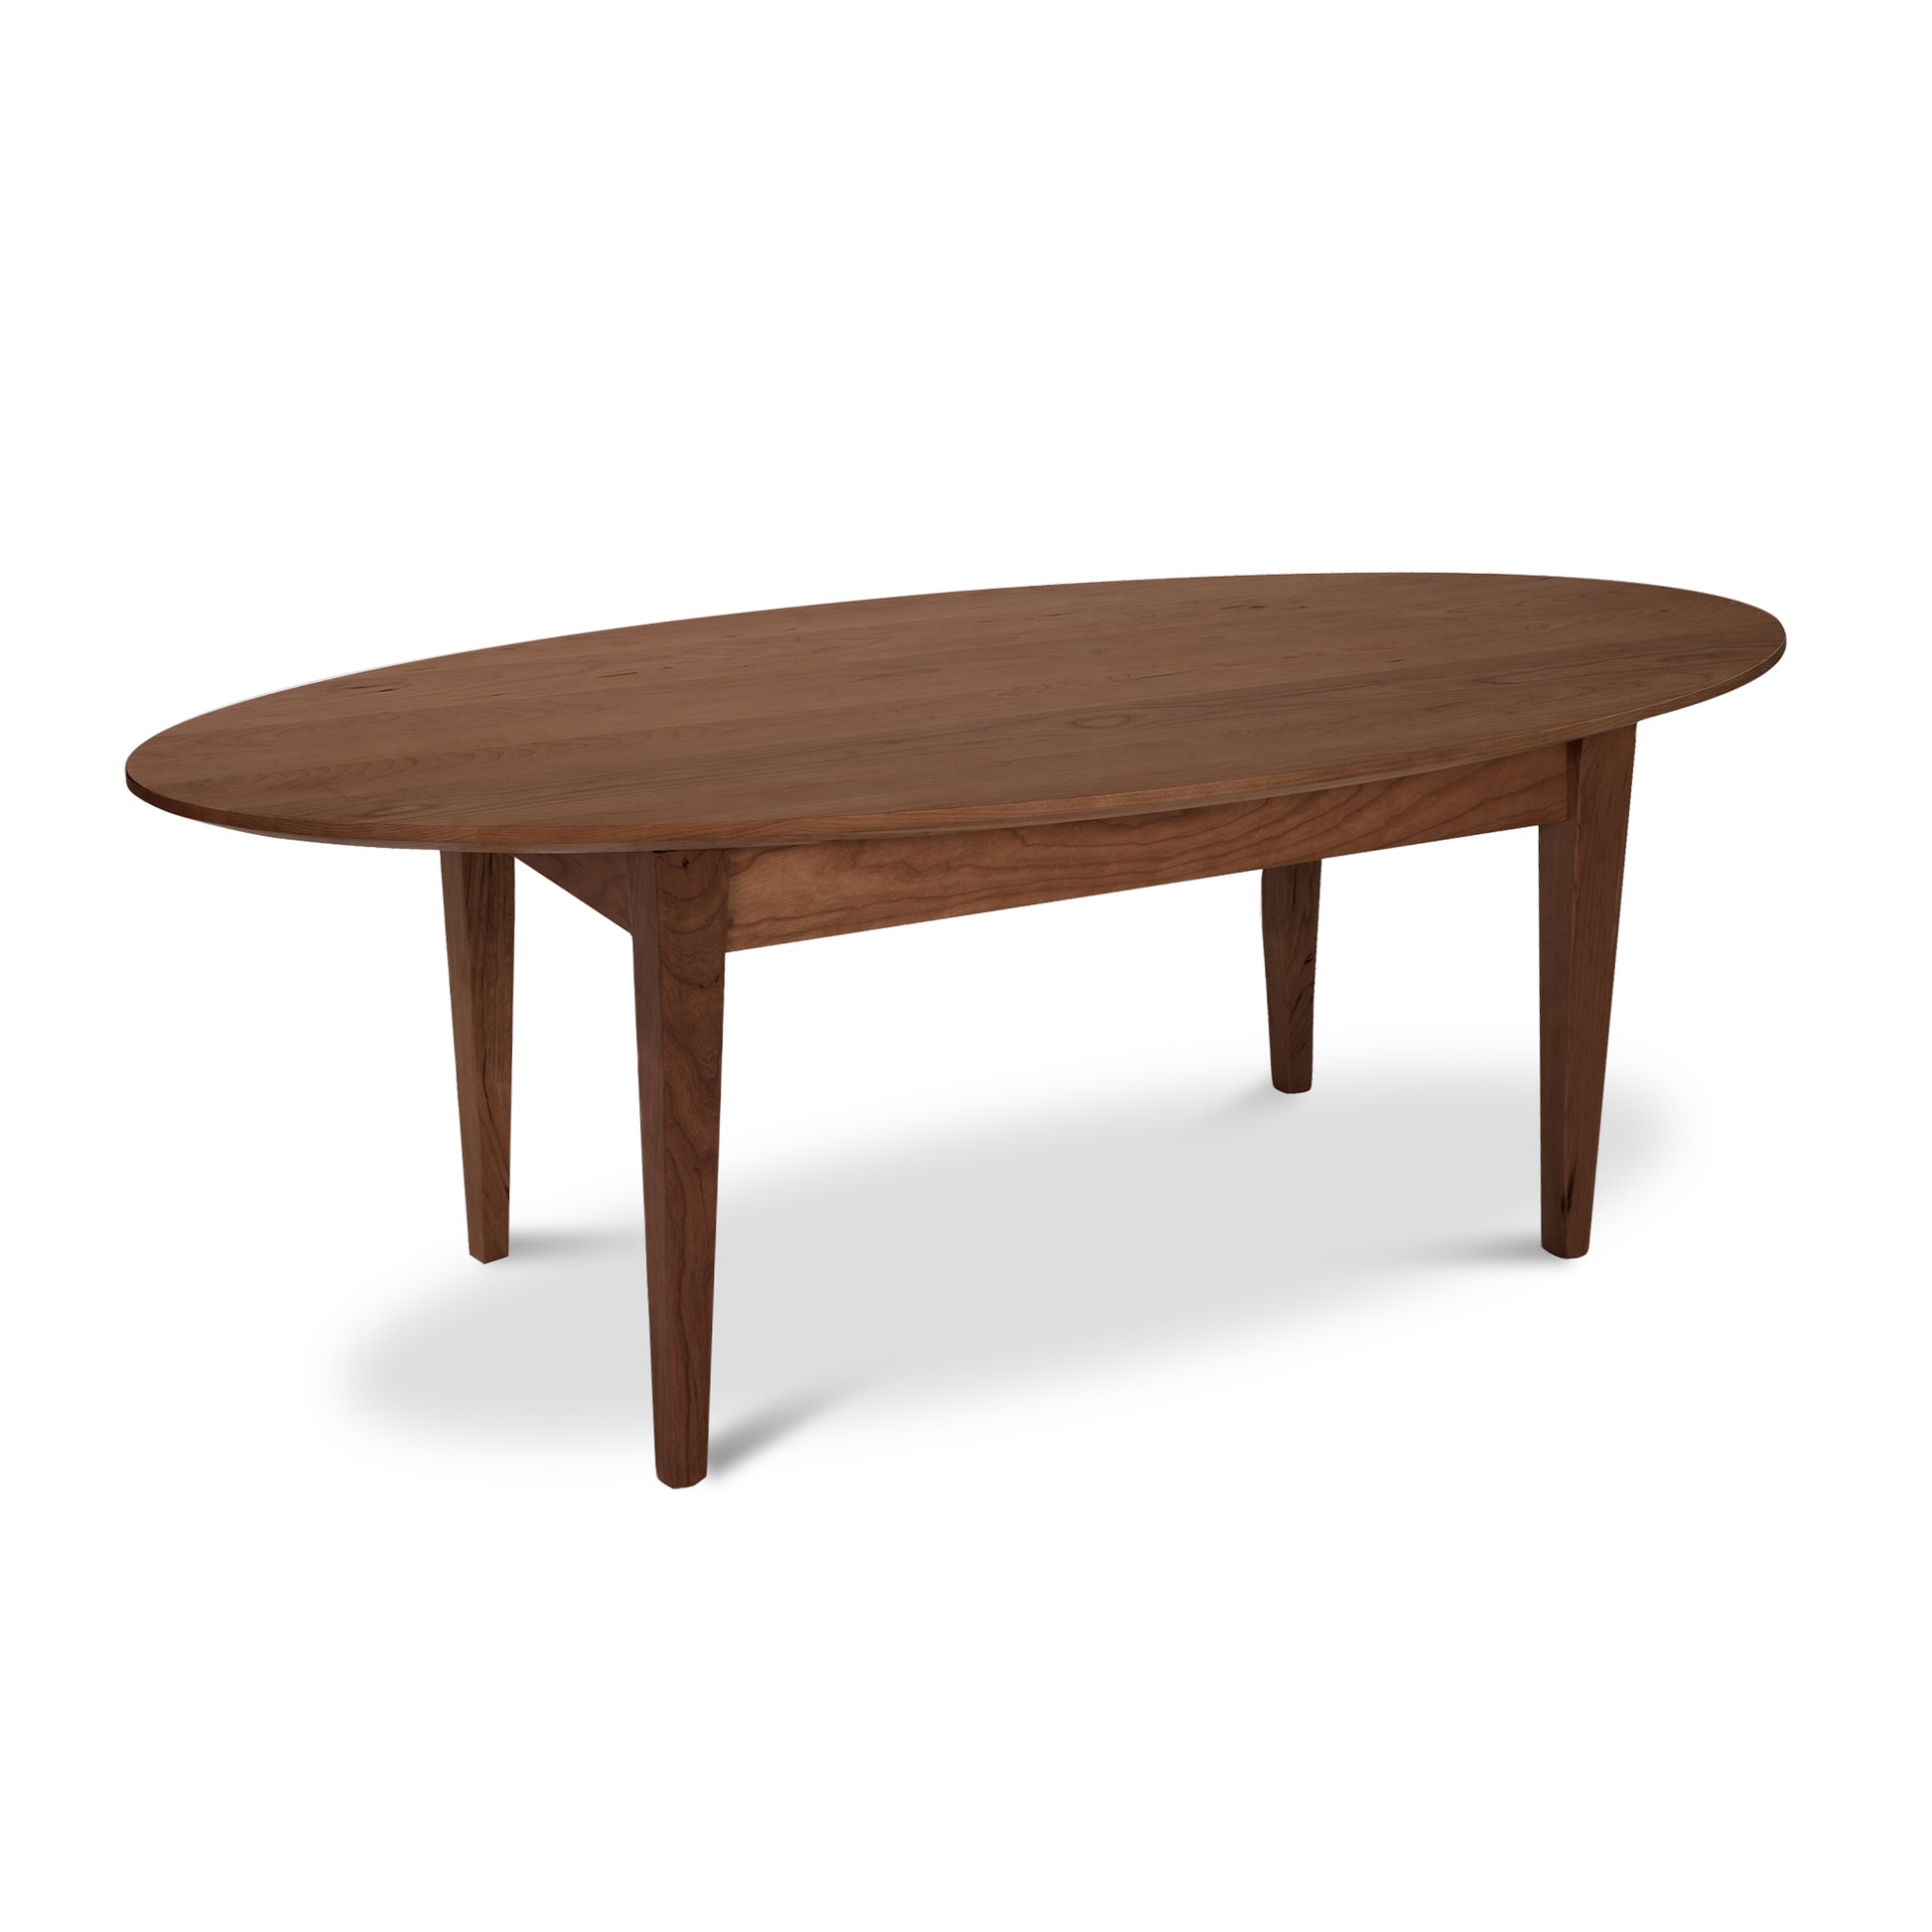 This Classic Shaker Oval Coffee Table by Lyndon Furniture features a sustainably harvested wooden base, making it an eco-friendly choice. It is meticulously handmade and exudes timeless elegance, making it a classic addition to any space.